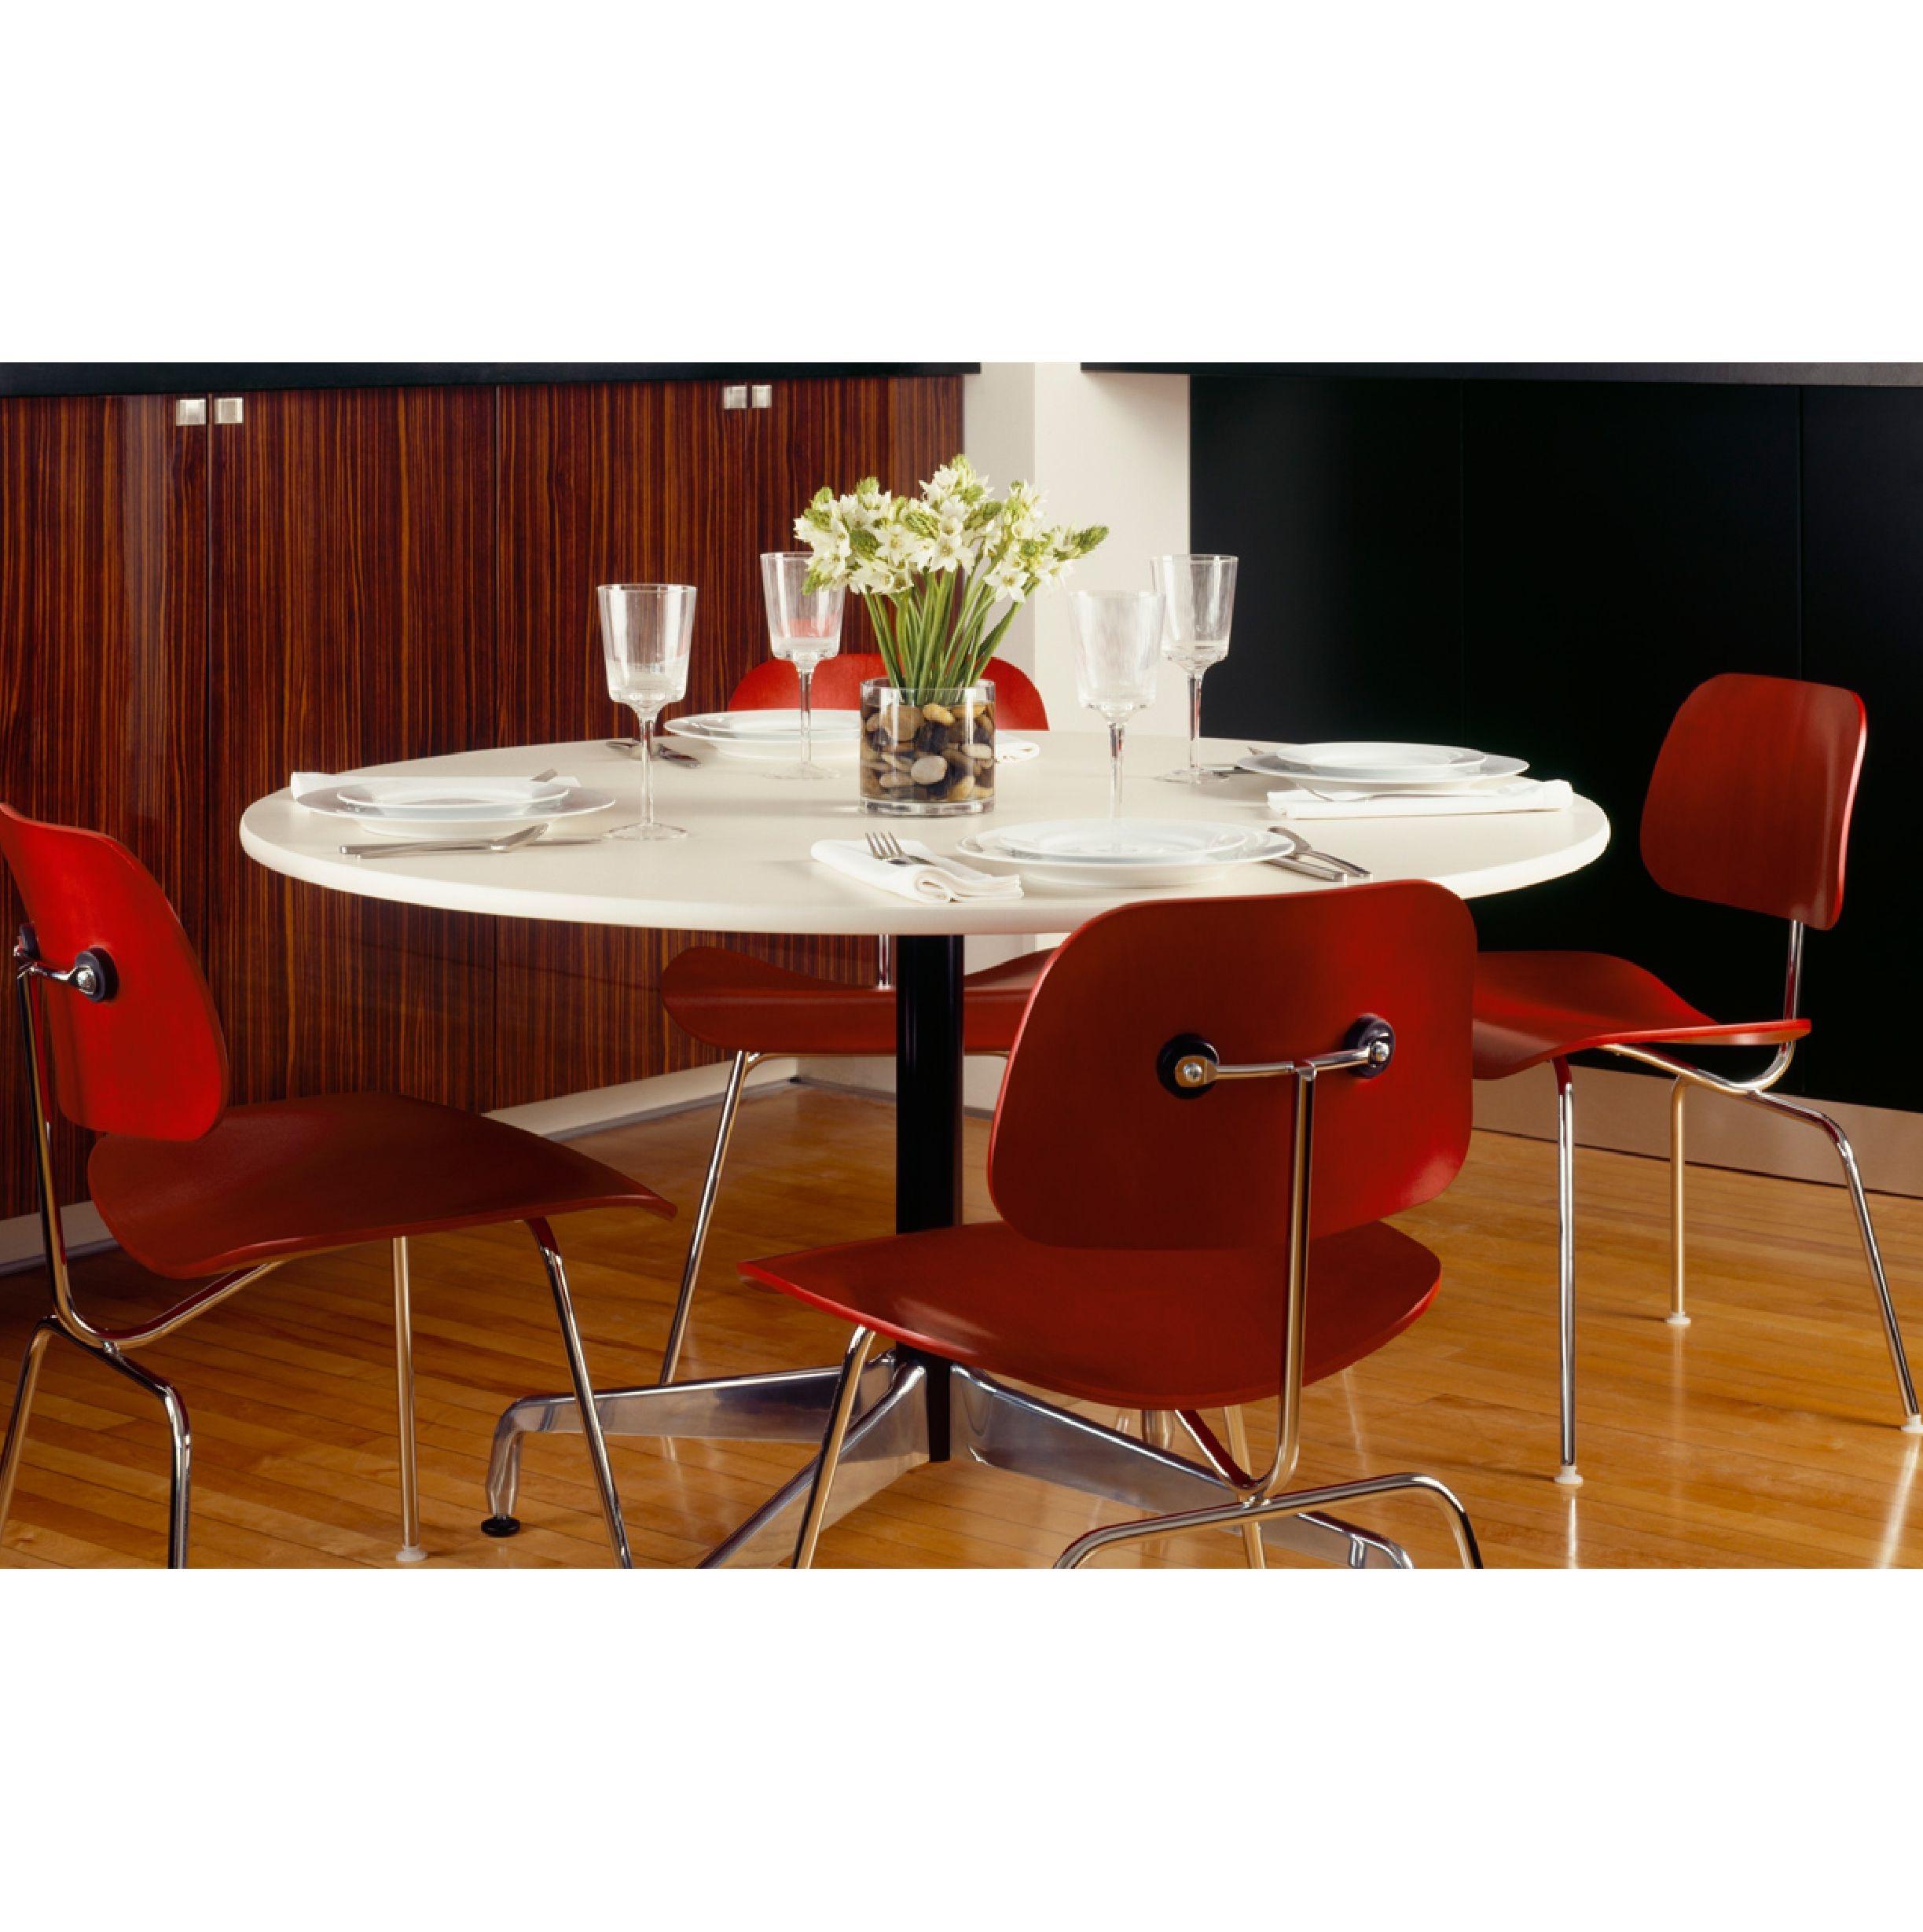 Chaise DCM Charles and Ray Eames, Herman Miller, Dining, Chaise d'appoint en hêtre rouge 1